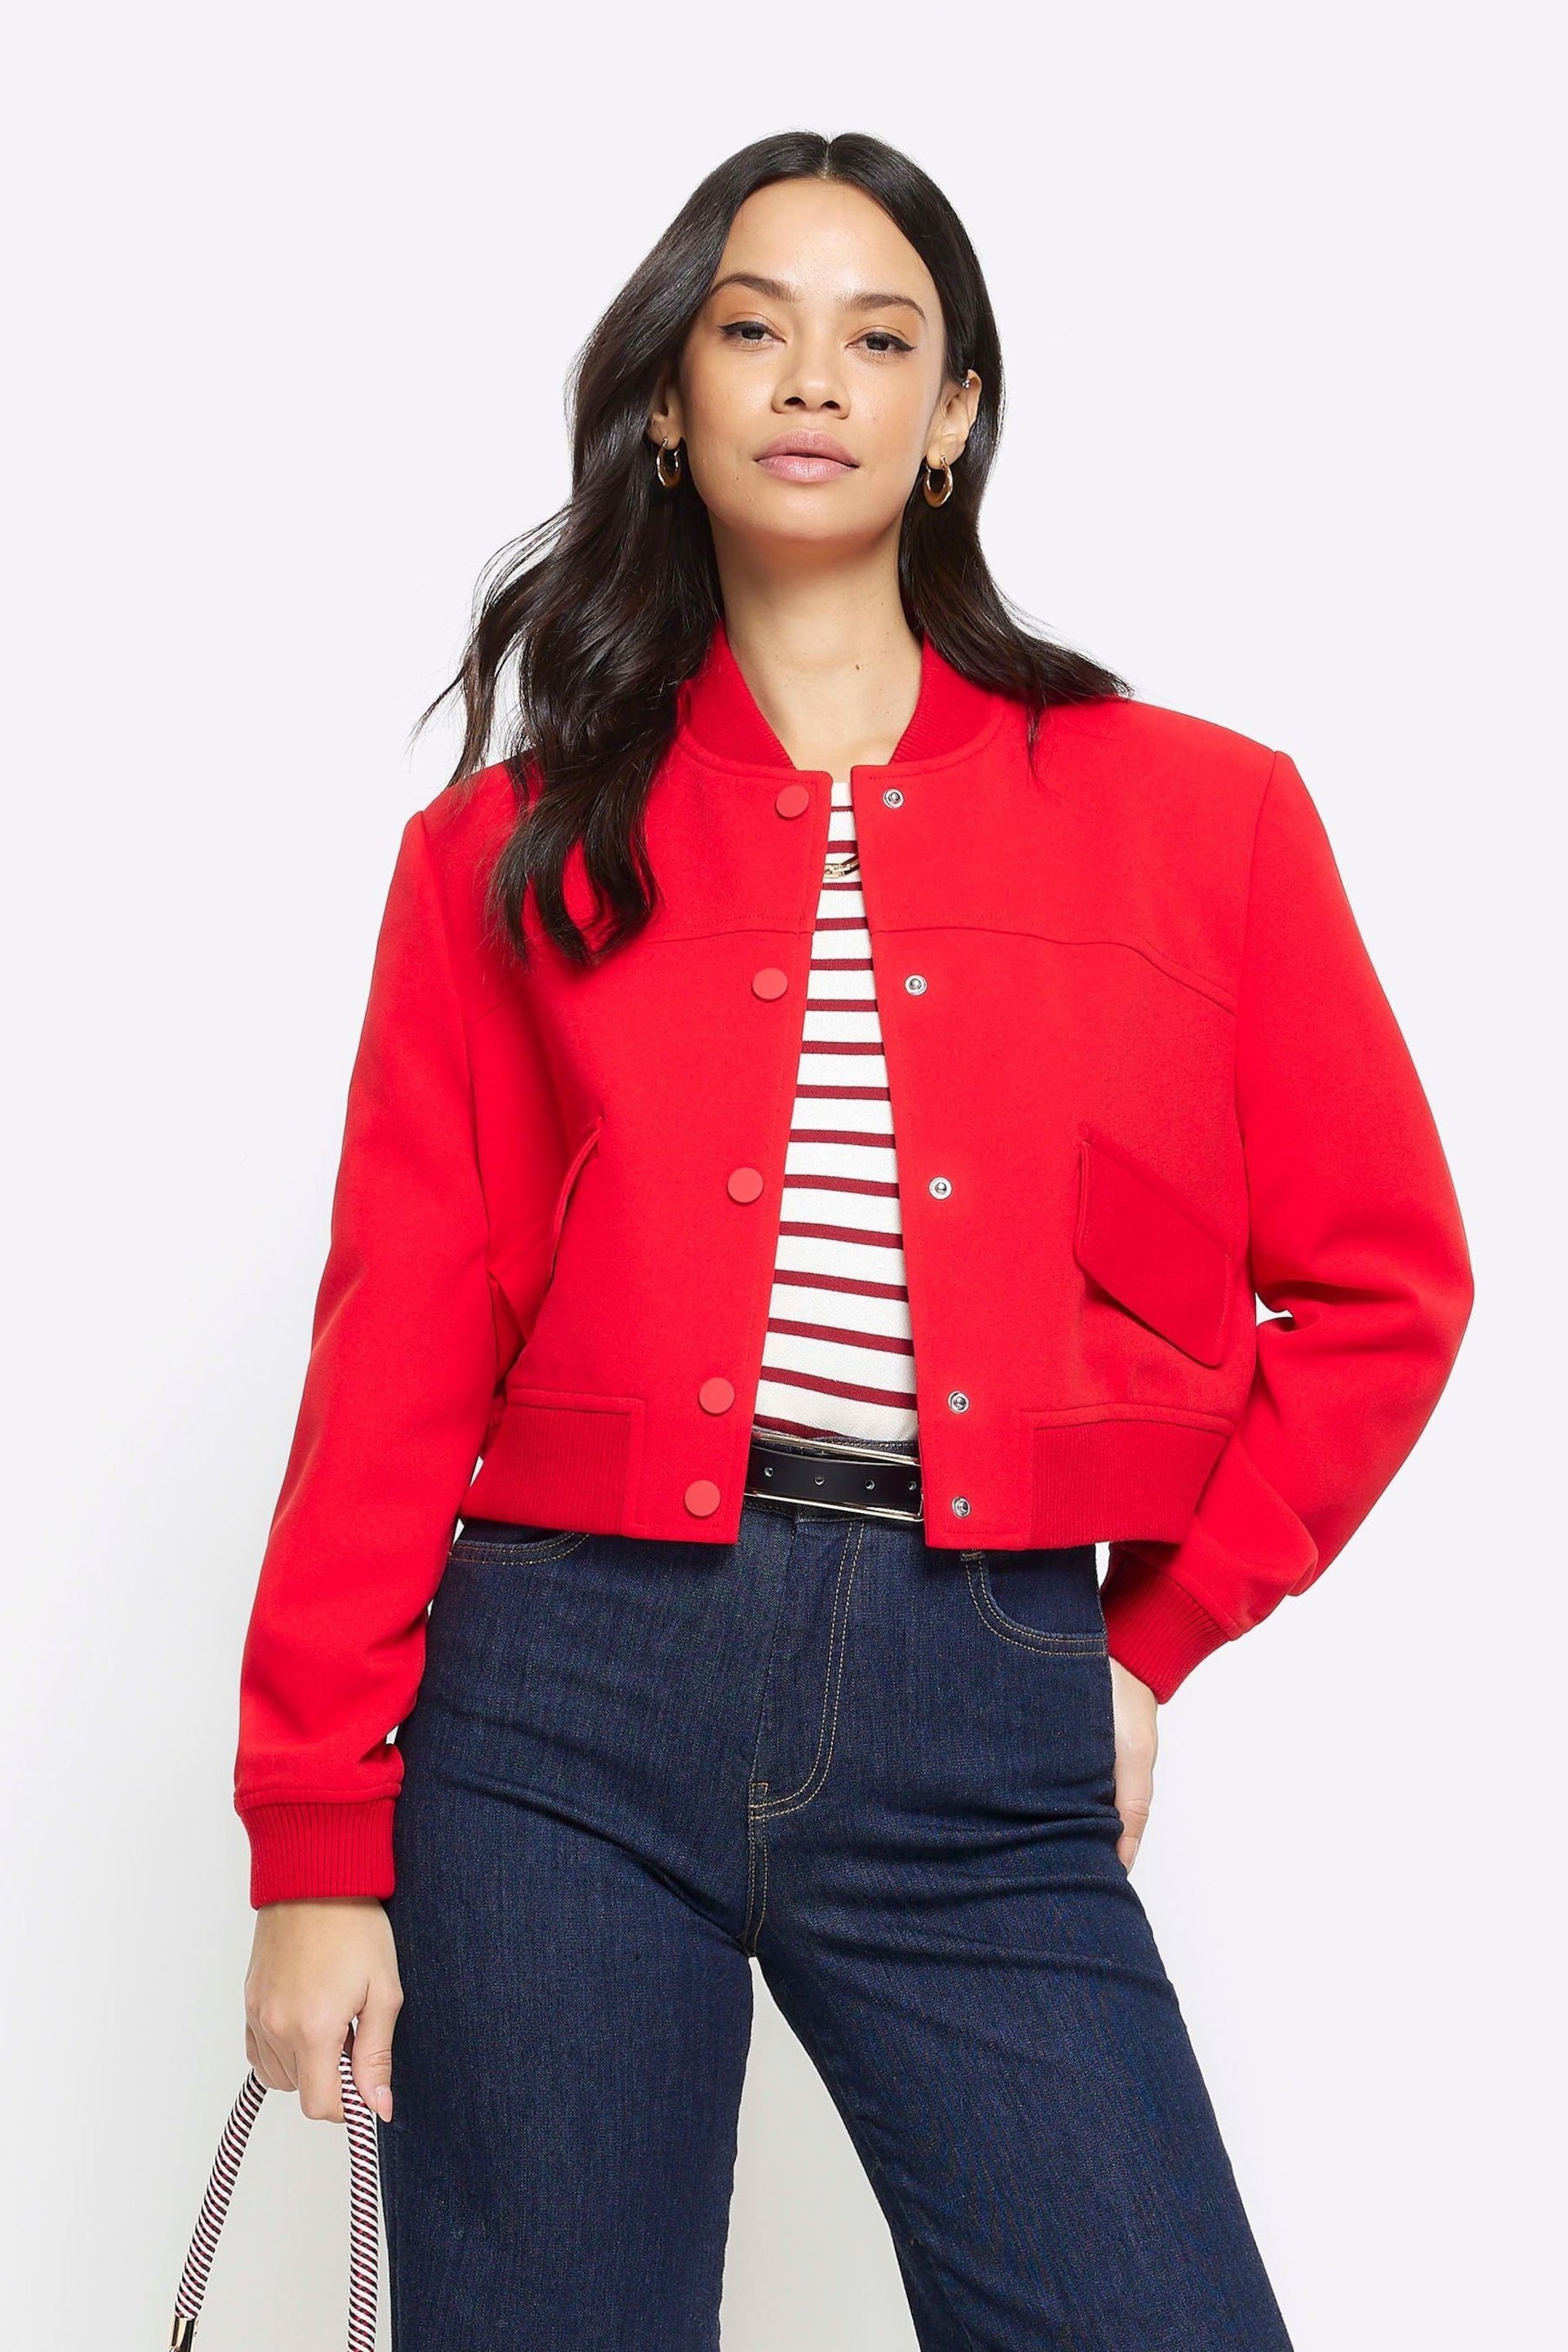 River Island Red Tailored Bomber Jacket - Image 1 of 6